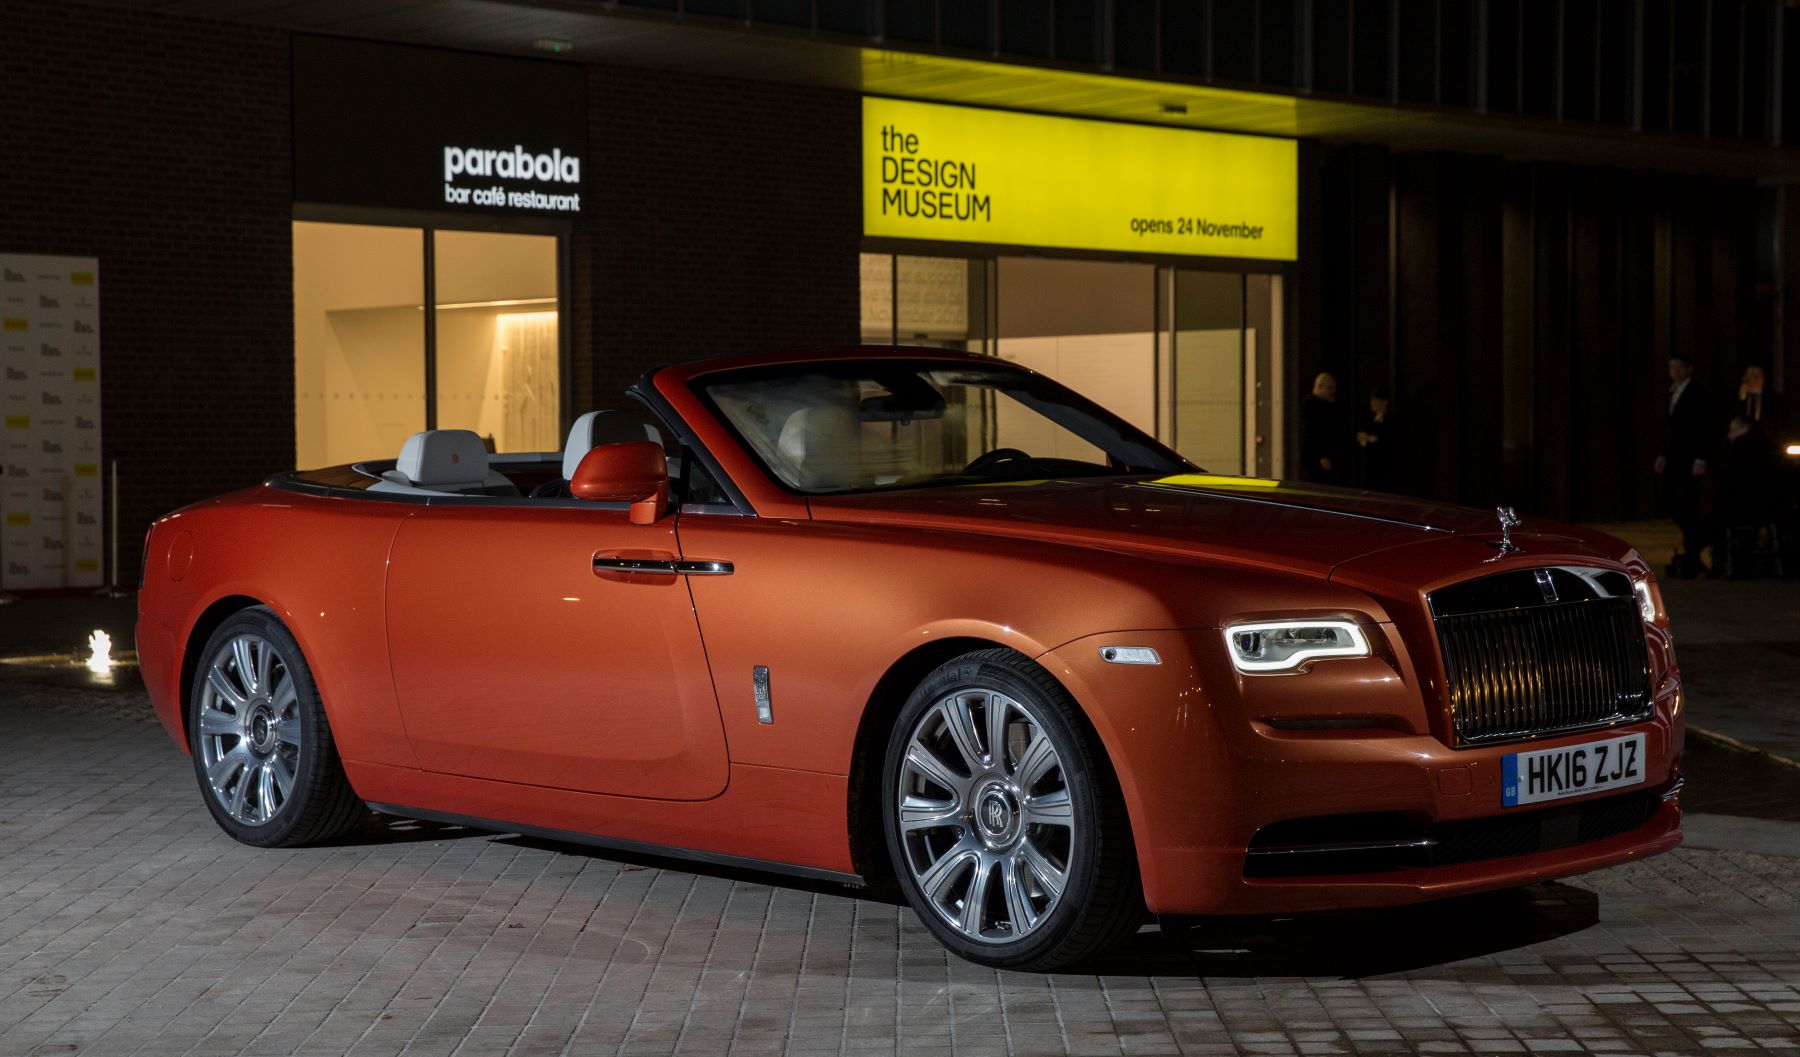 A Rolls-Royce Dawn parked outside the Design Museum in London, England